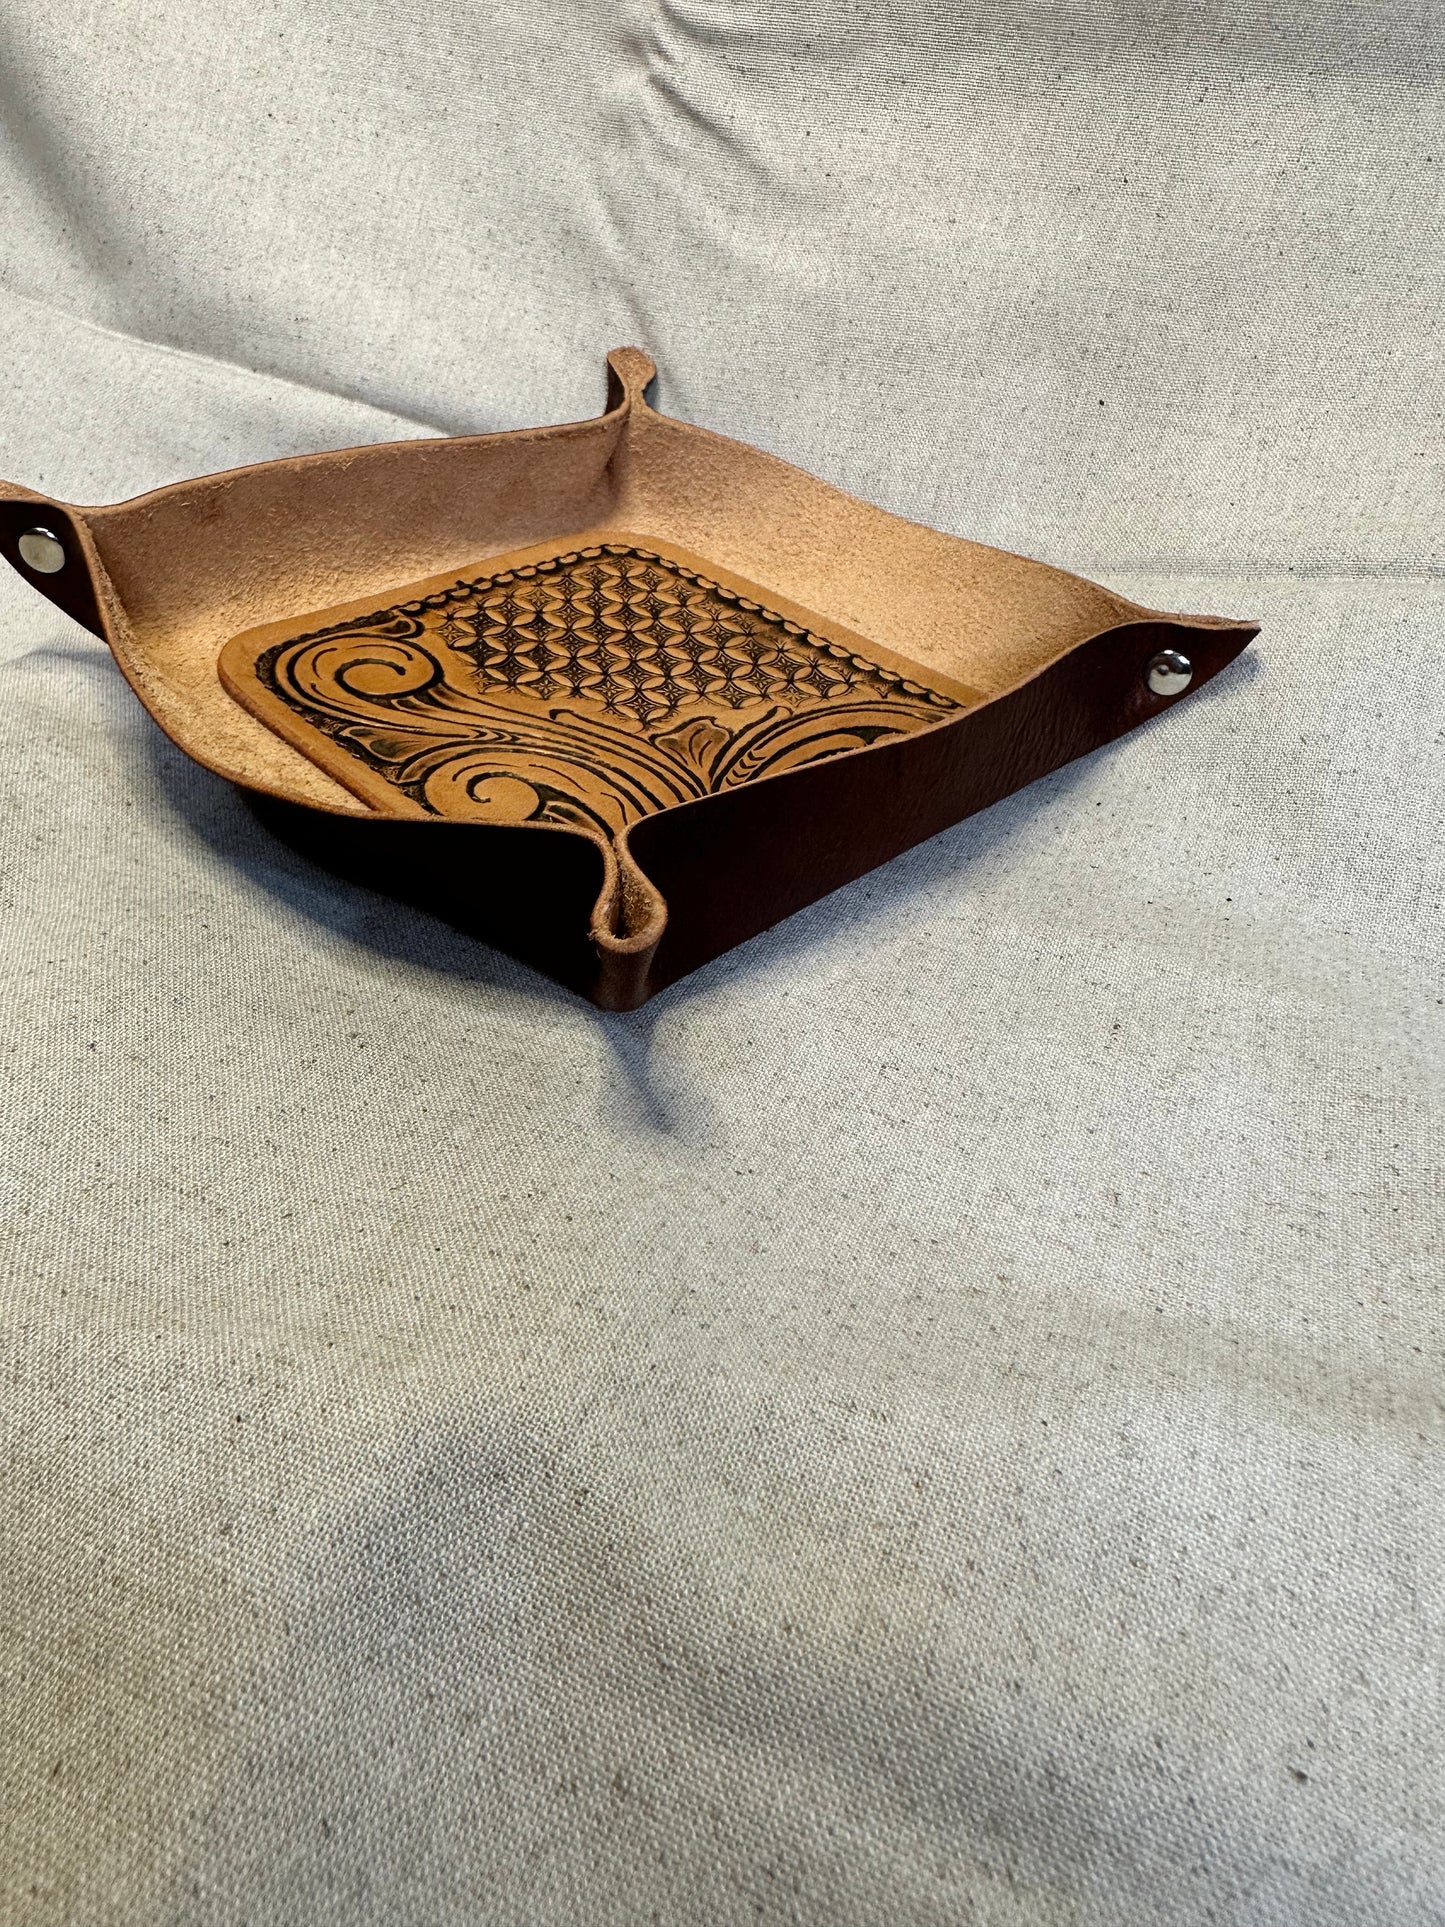 Valet Tray - Hand Tooled & Geometric Stamped